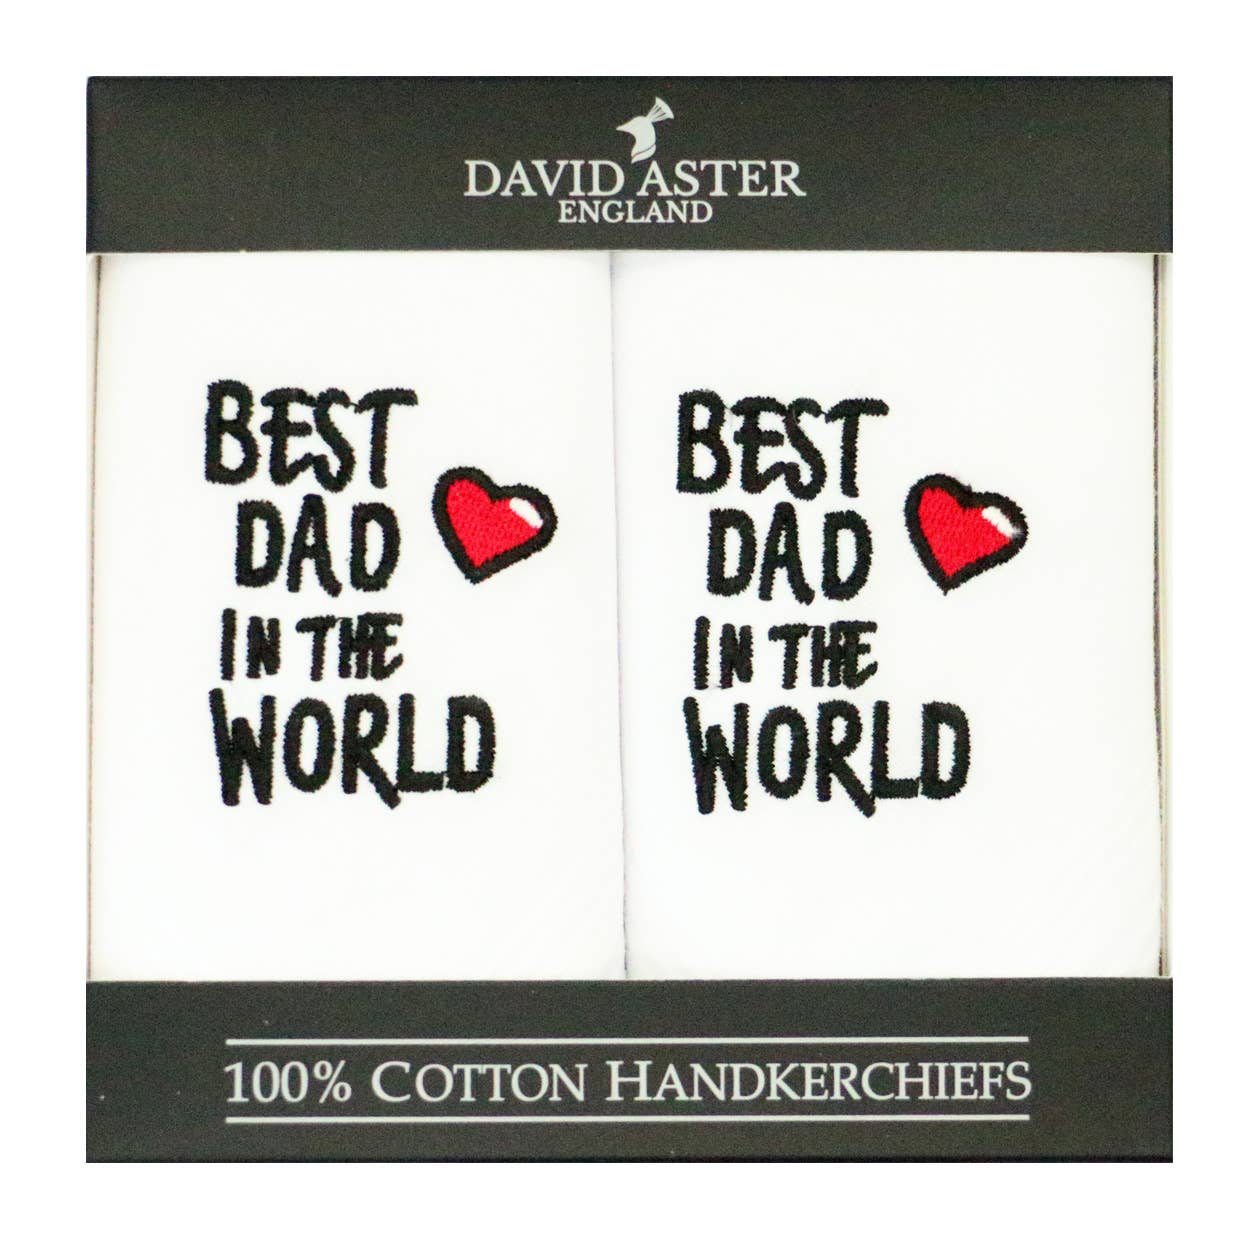 Best Dad In The World Embroidered Handkerchiefs -  fra Dalaco - incorporating David Aster hos The Prince Webshop